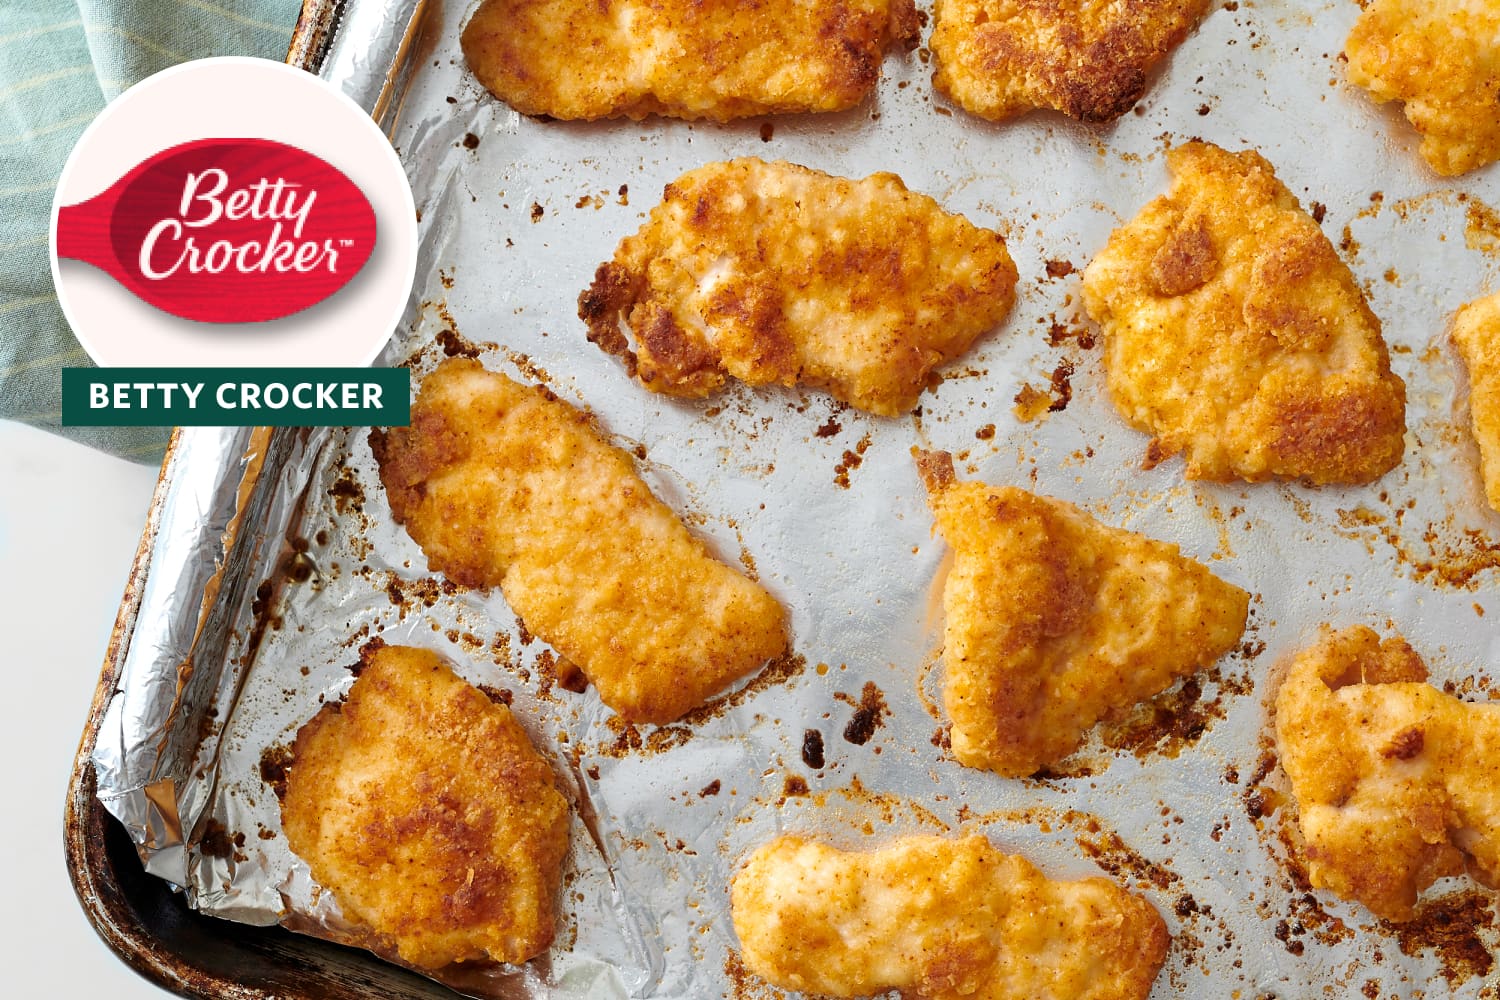 This Extremely Popular Chicken Tender Recipe Has a Clever Secret Ingredient